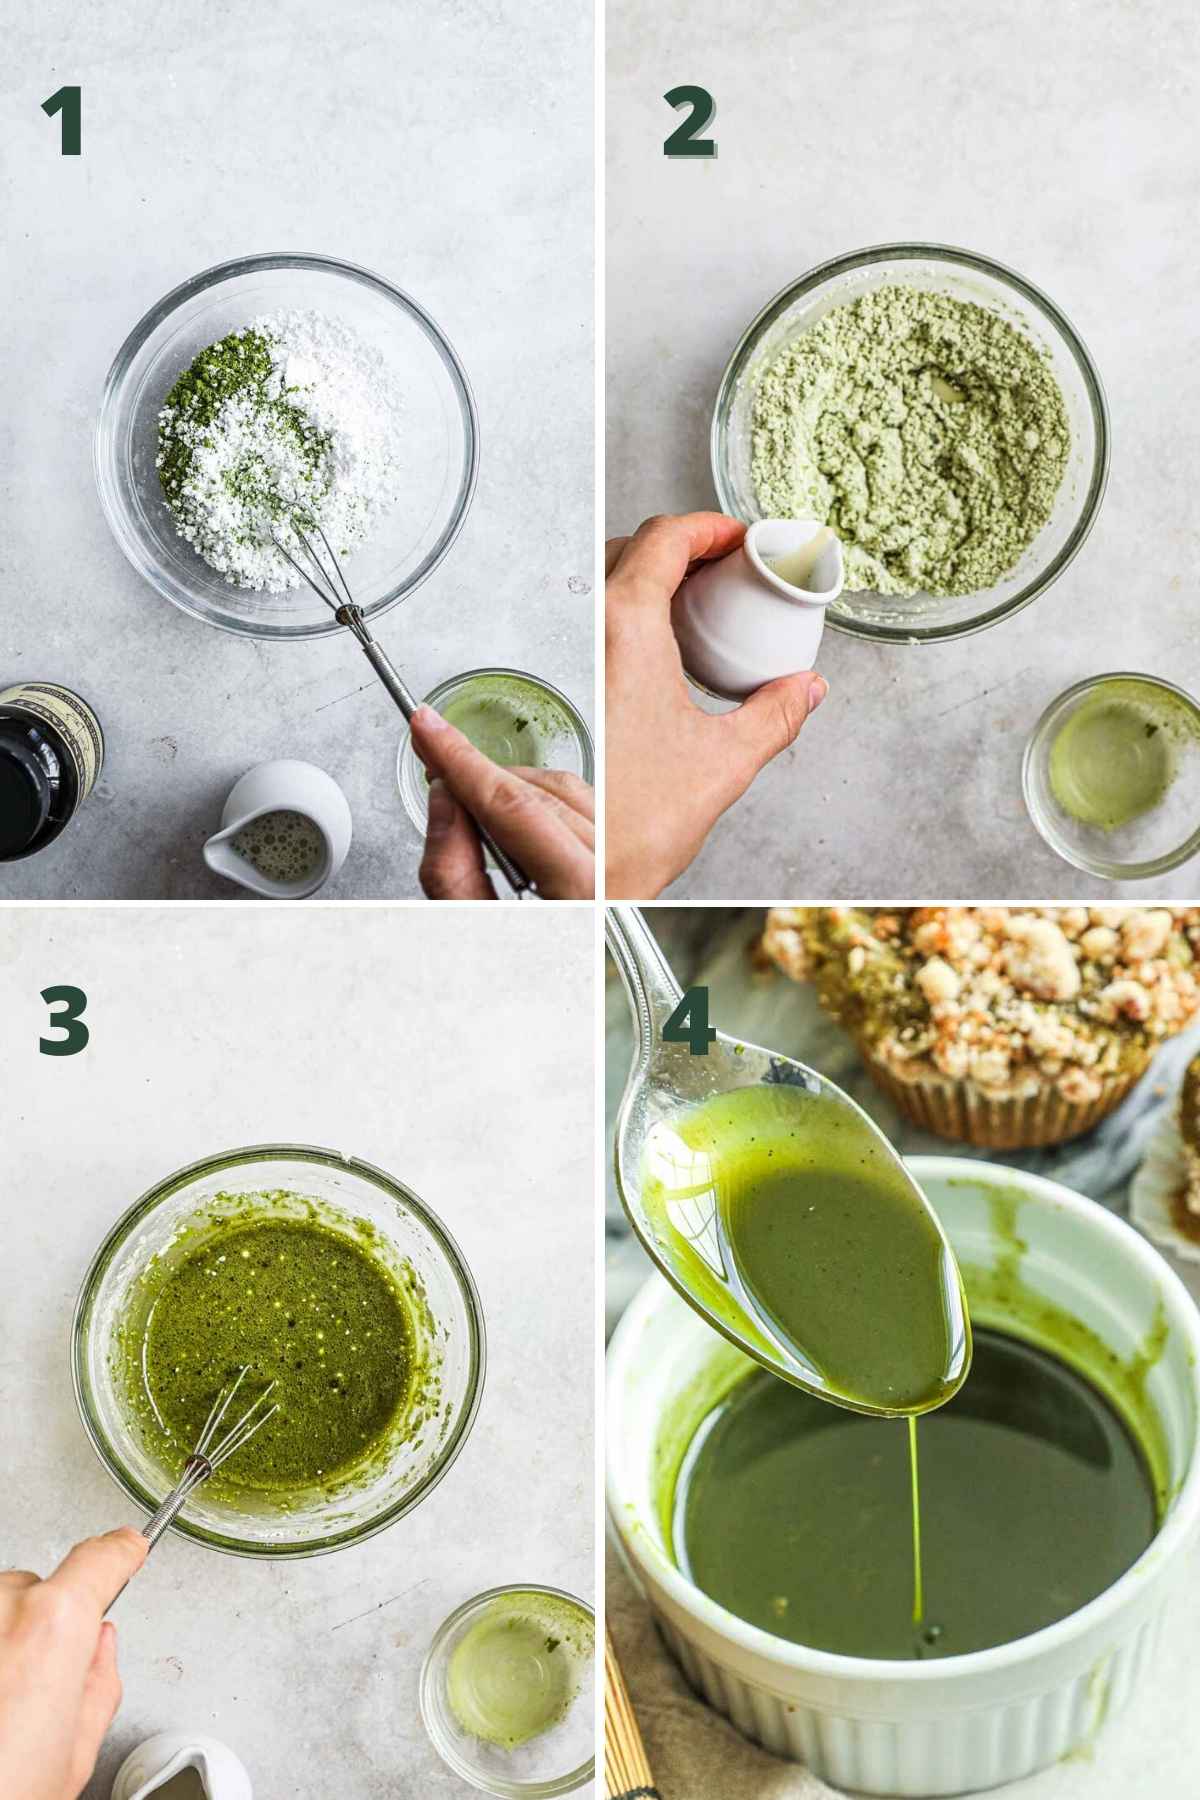 Steps to make matcha vanilla bean glaze, including mixing the dry ingredients, adding the milk, and stirring until smooth.